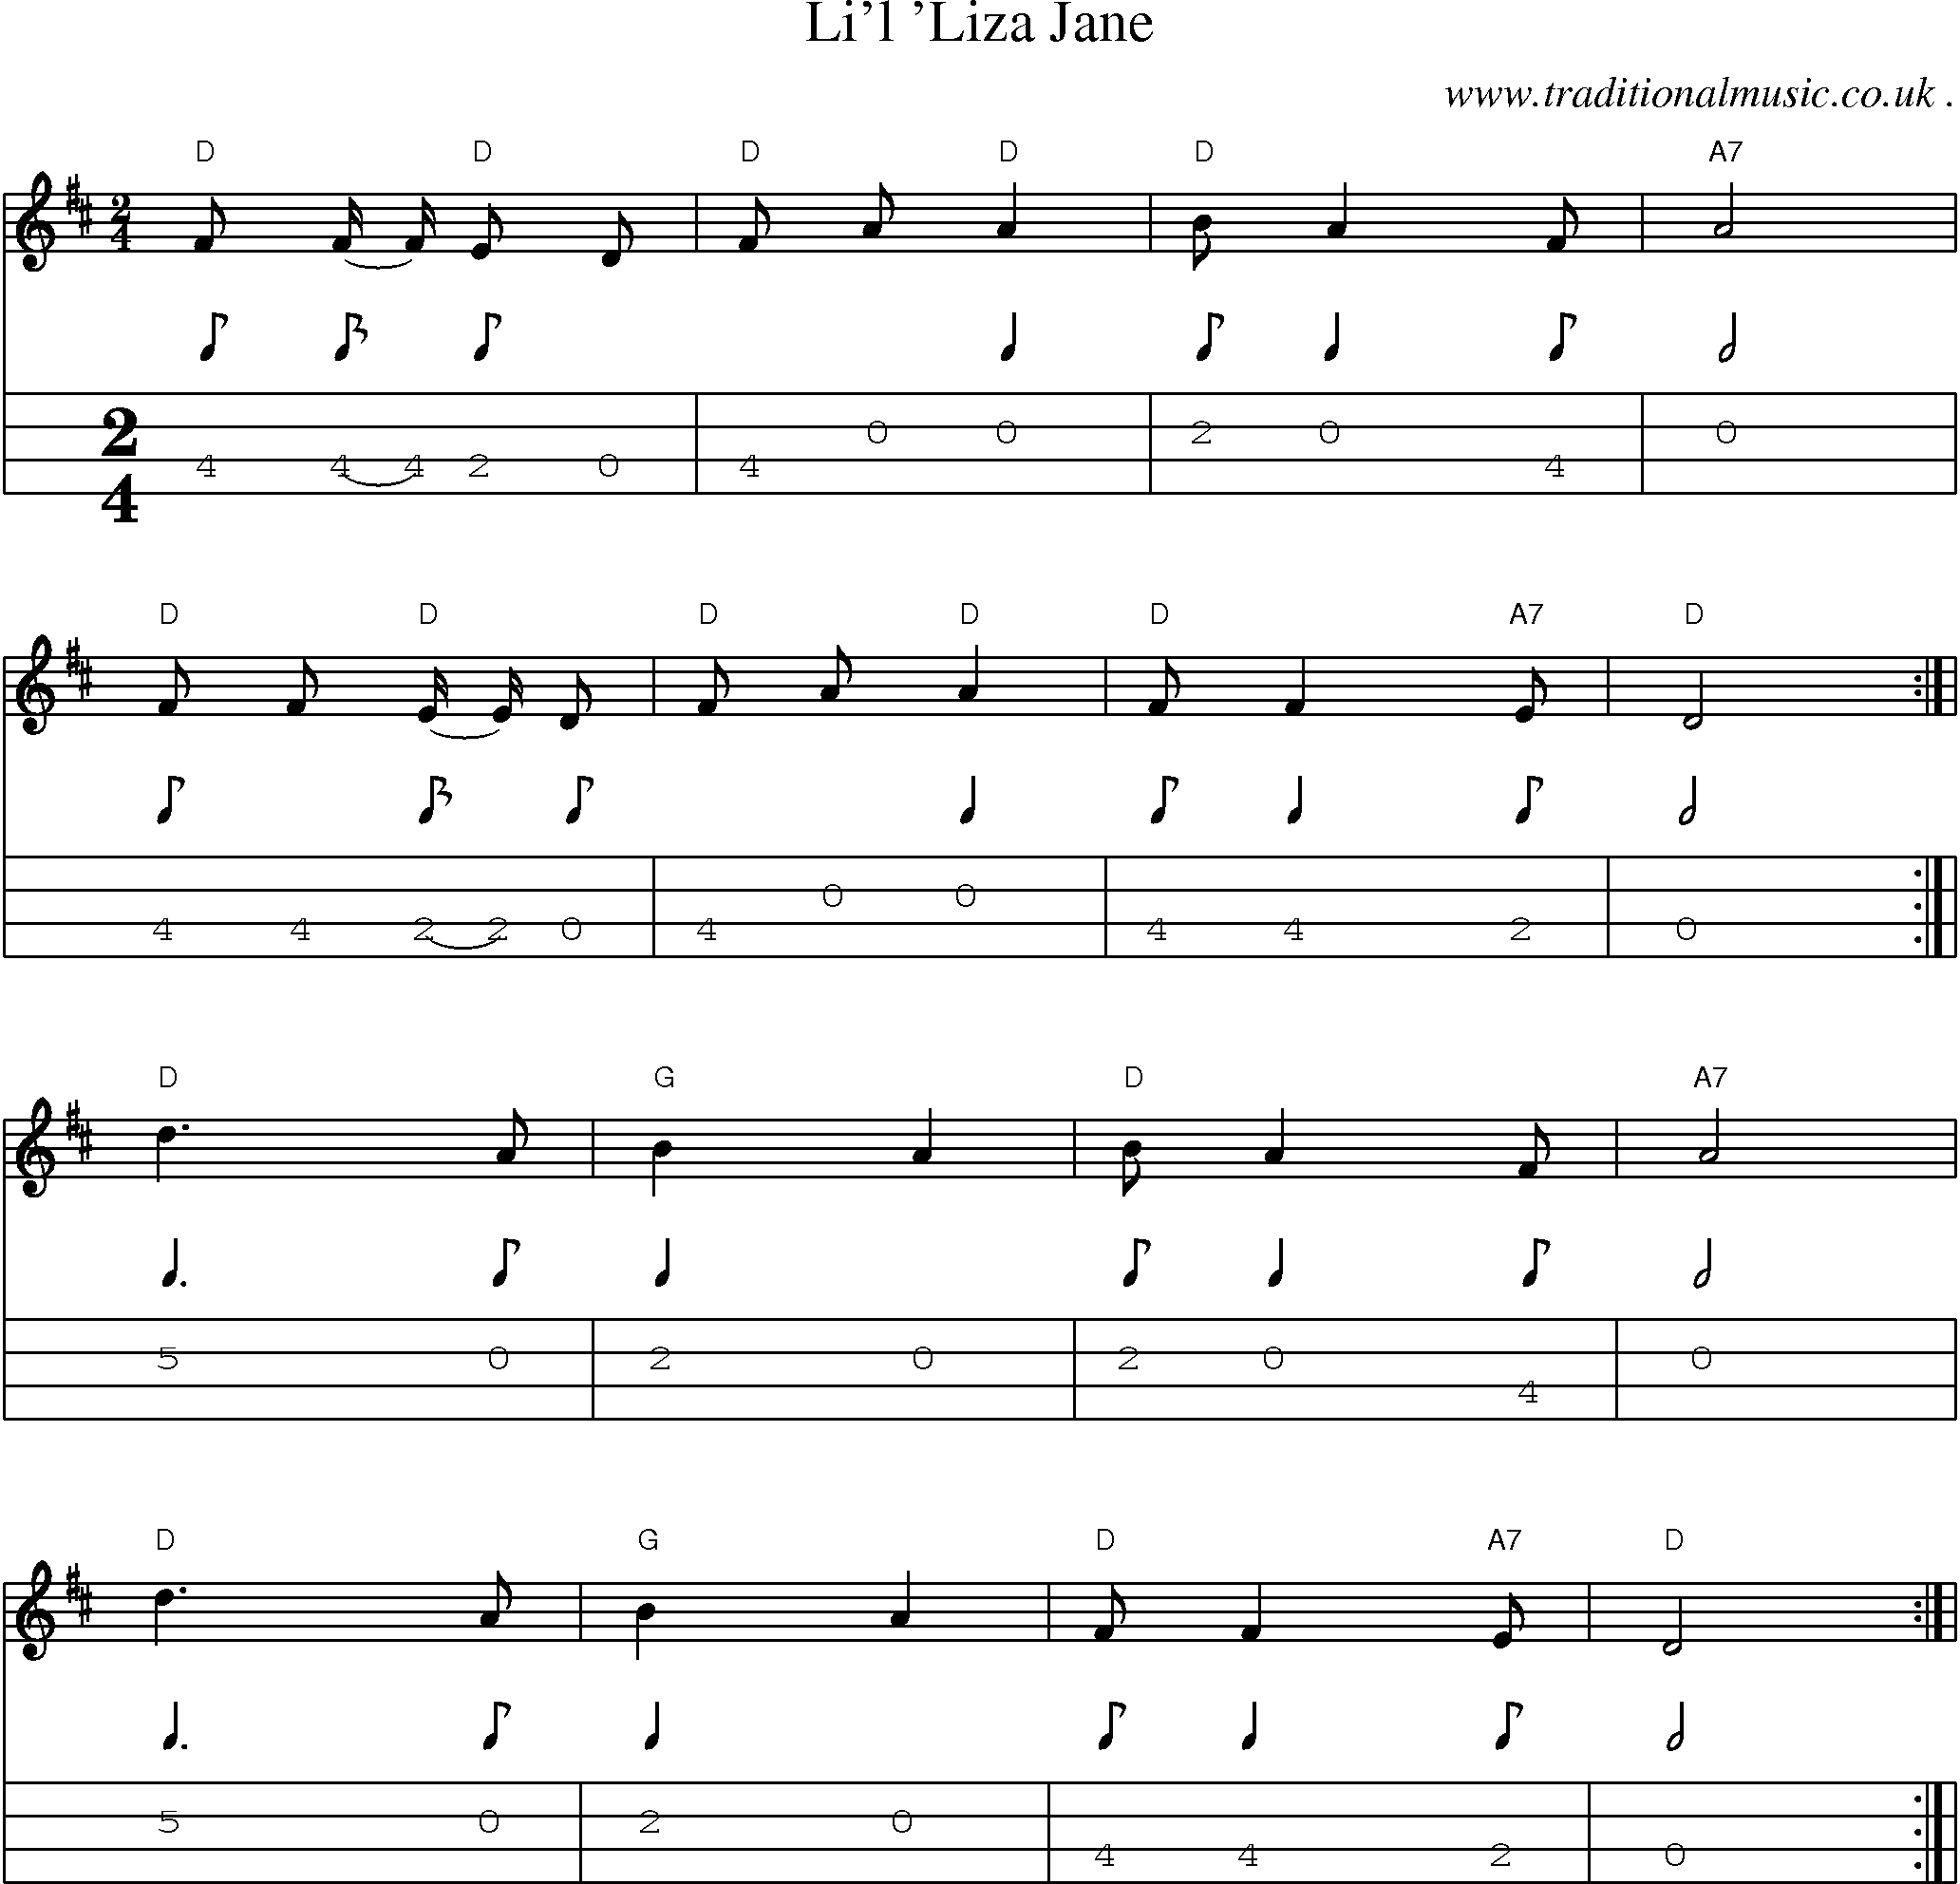 Music Score and Guitar Tabs for Lil Liza Jane